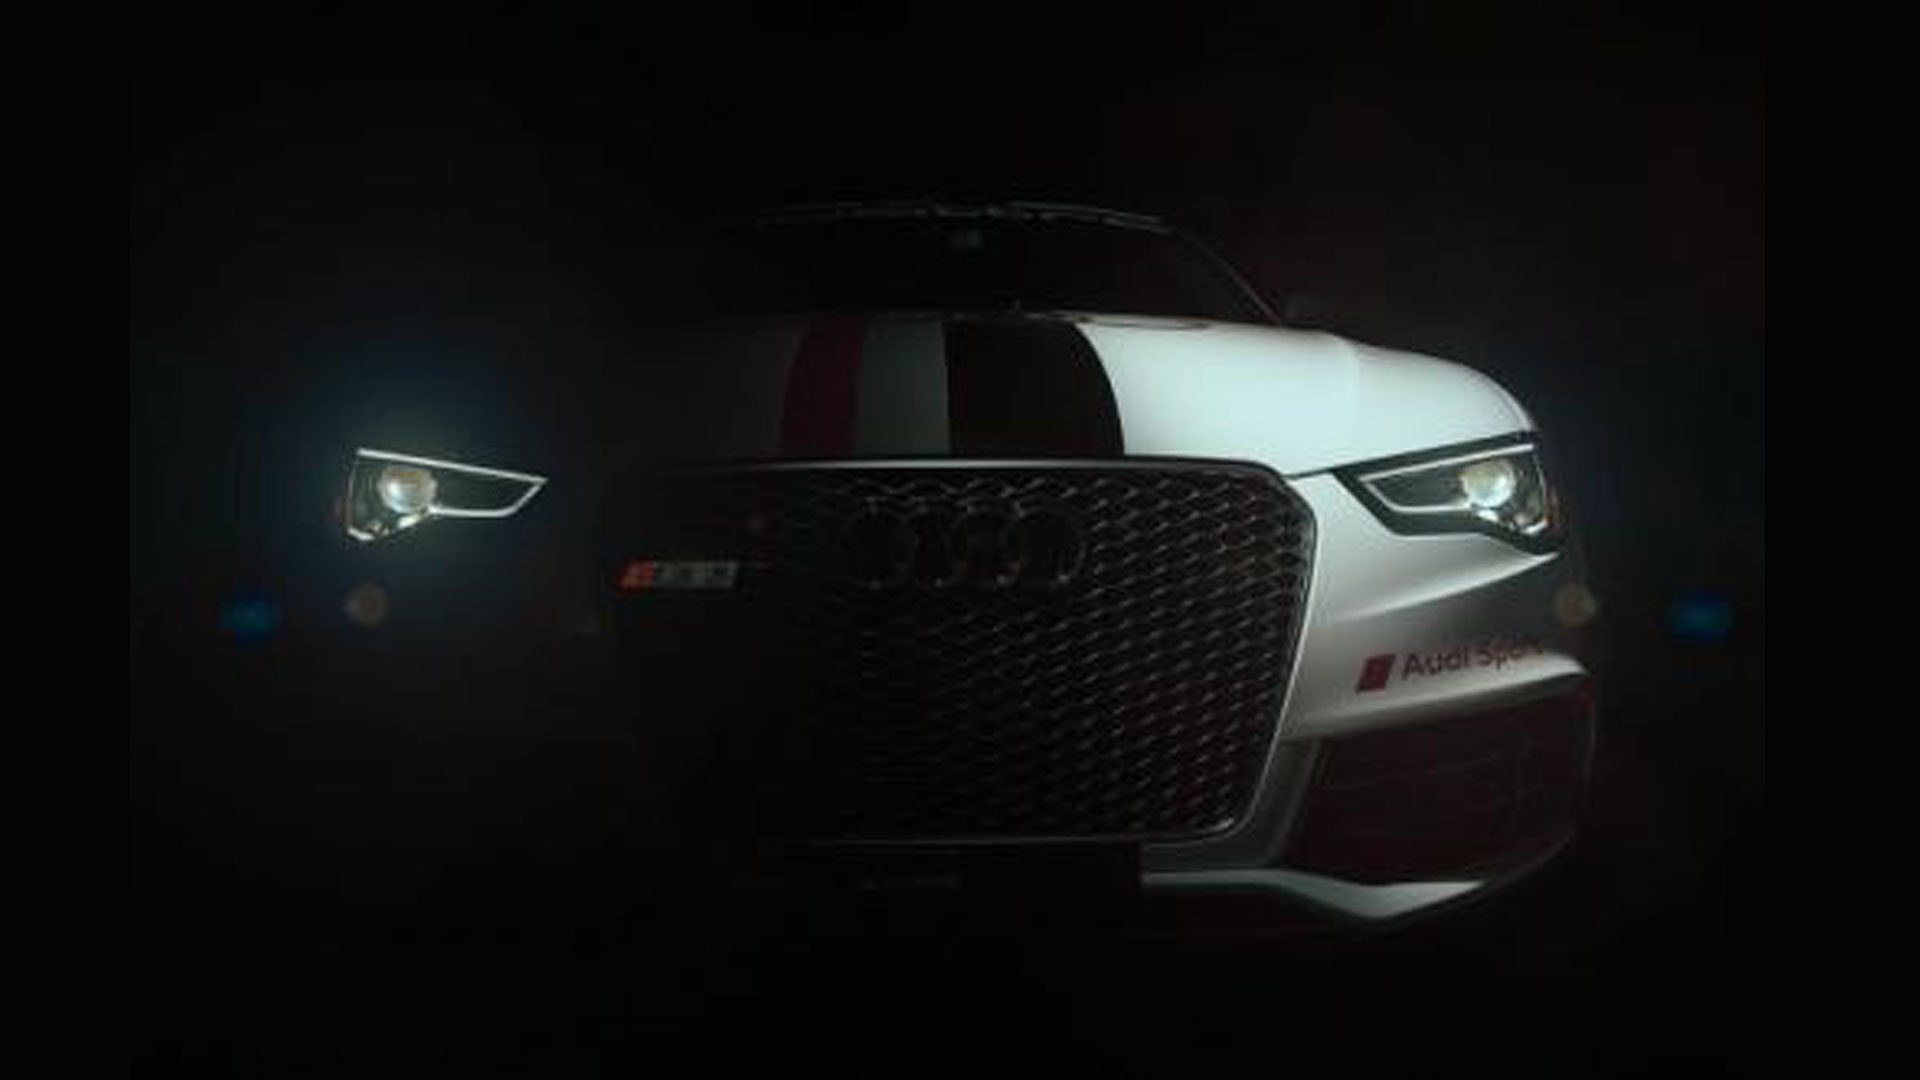 Audi Wallpaper For Android